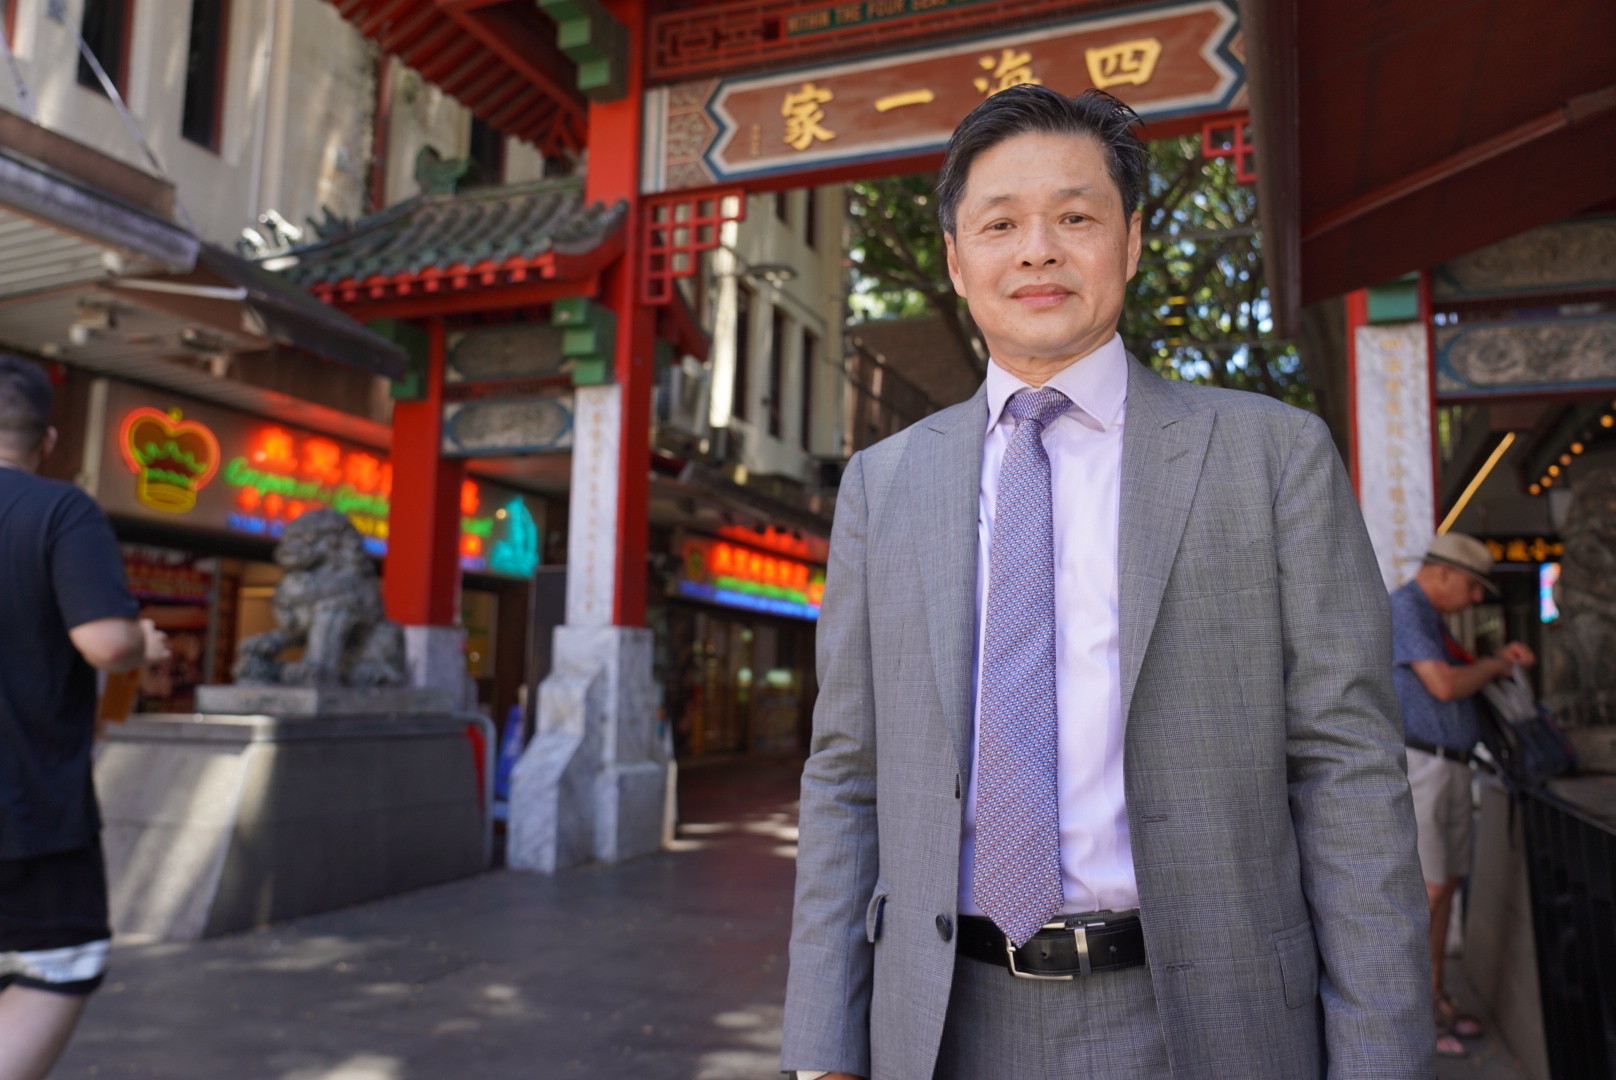 A man wearing a grey suit and lavender tie and shirt stands in front of a Chinese paifang and restaurants.